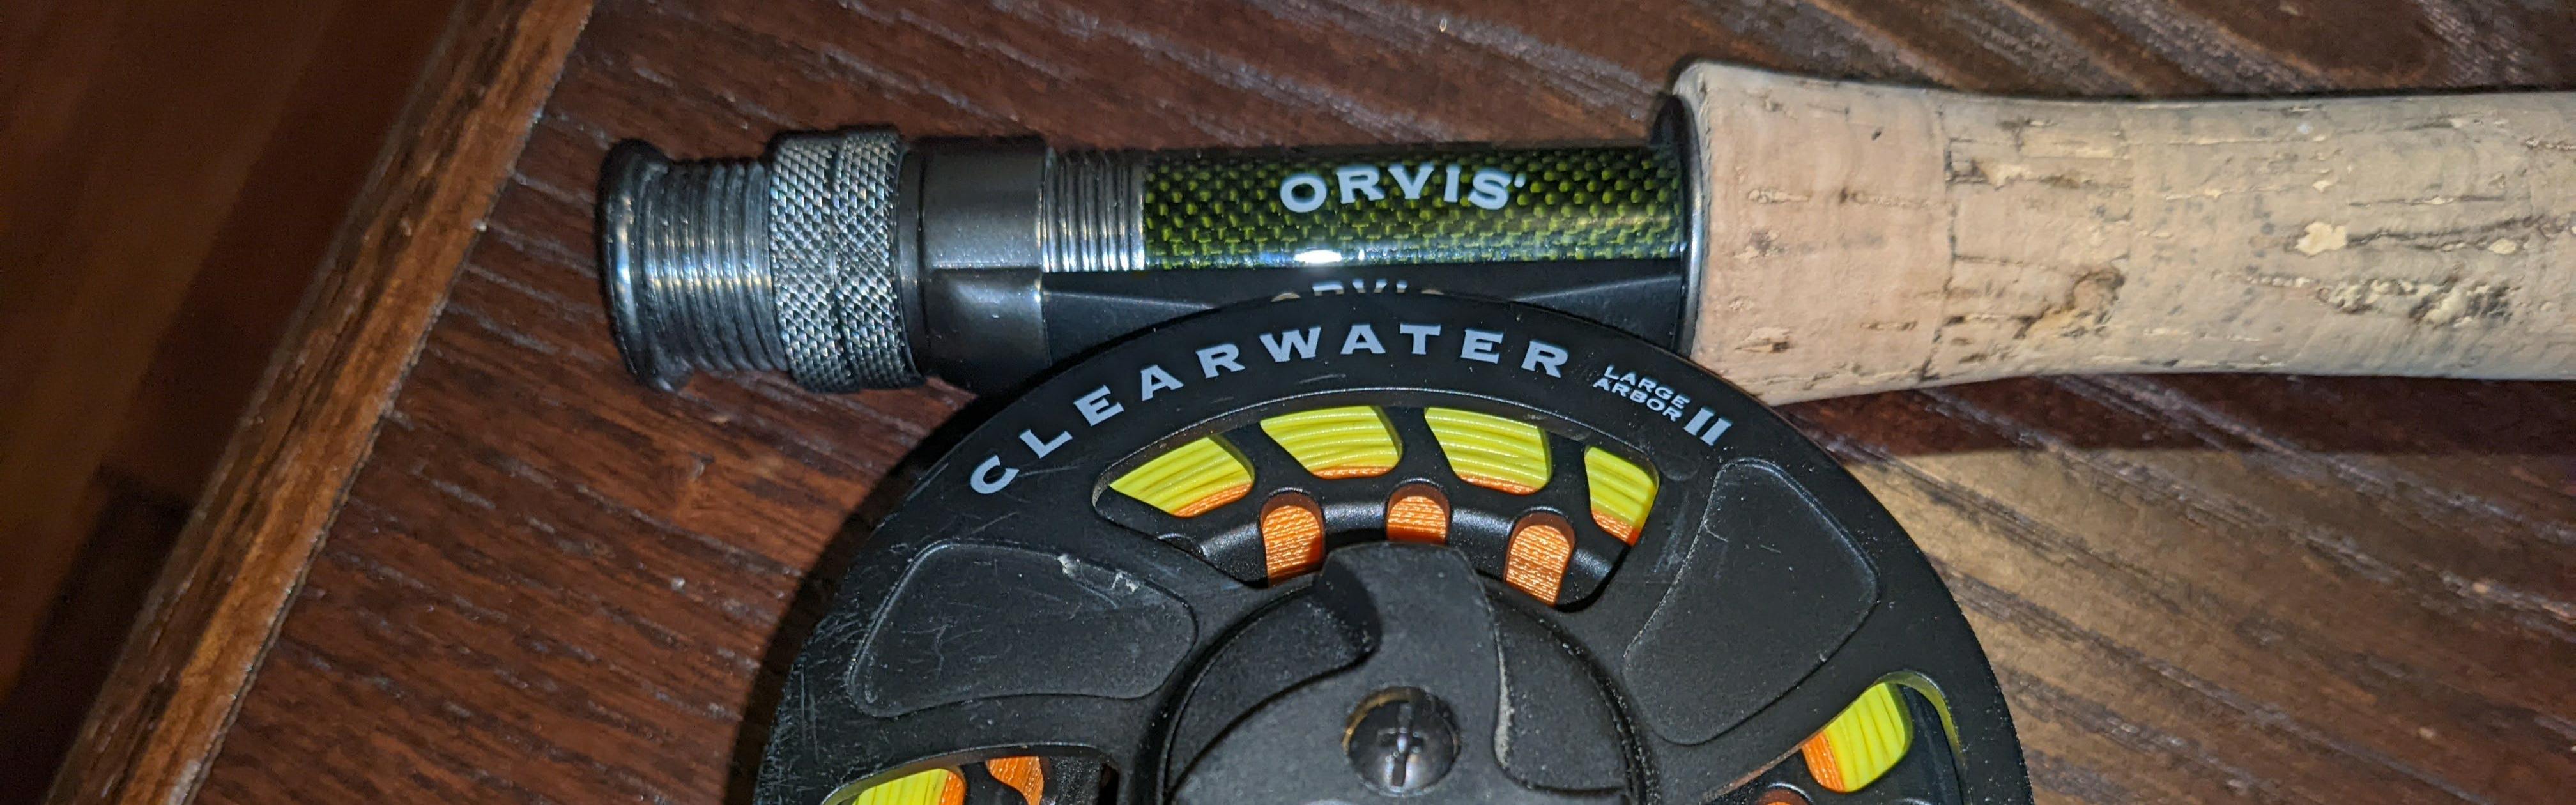 Expert Review: Orvis Encounter Fly Rod Outfit